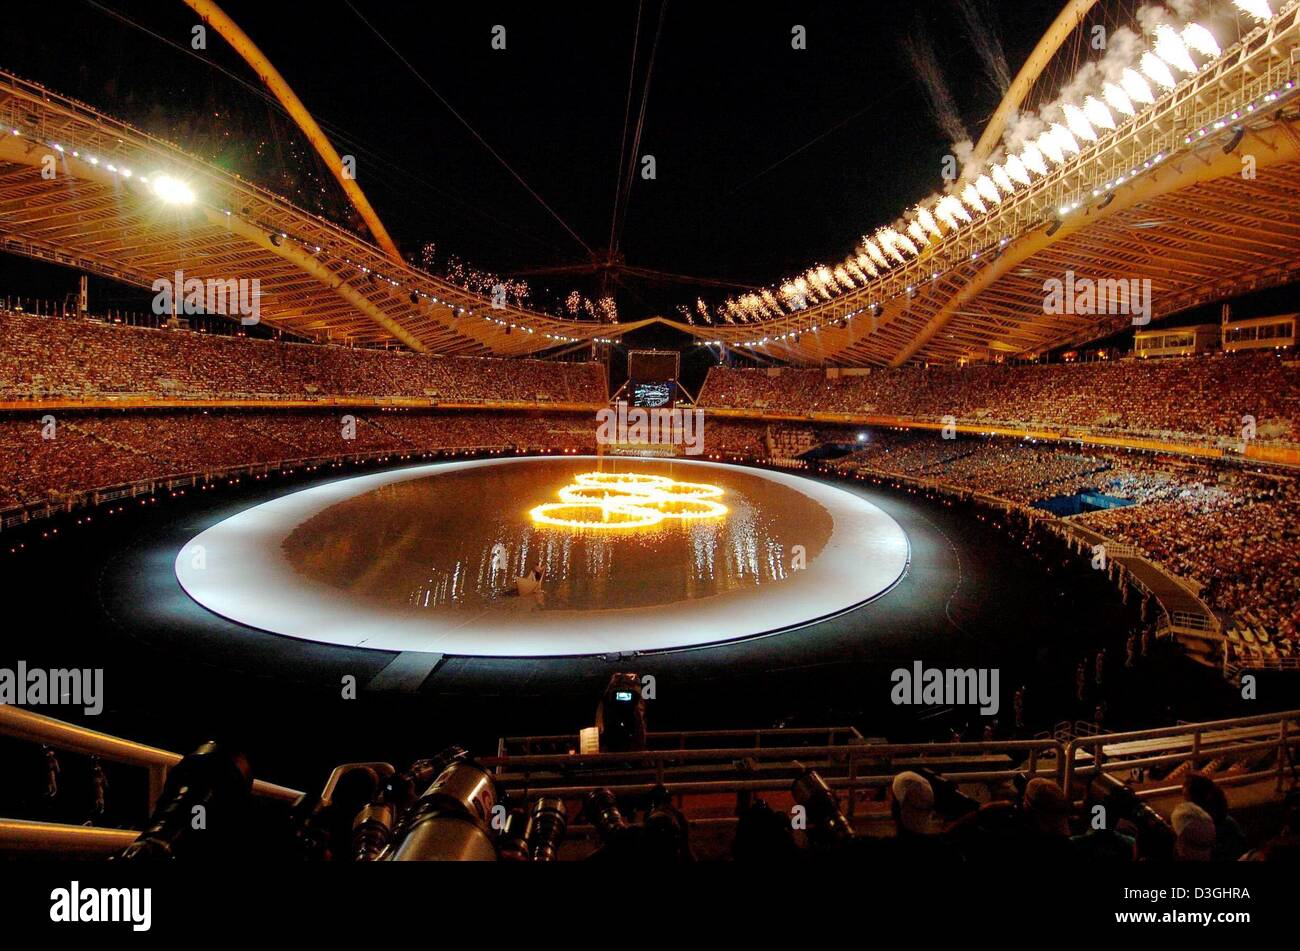 (dpa) - The Olympic Rings on fire in the Olympic Stadium during the opening ceremony of the 2004 Olympic Games in Athens, Friday 13 August 2004. More than 10.800 athletes will compete in the Olympics. Stock Photo